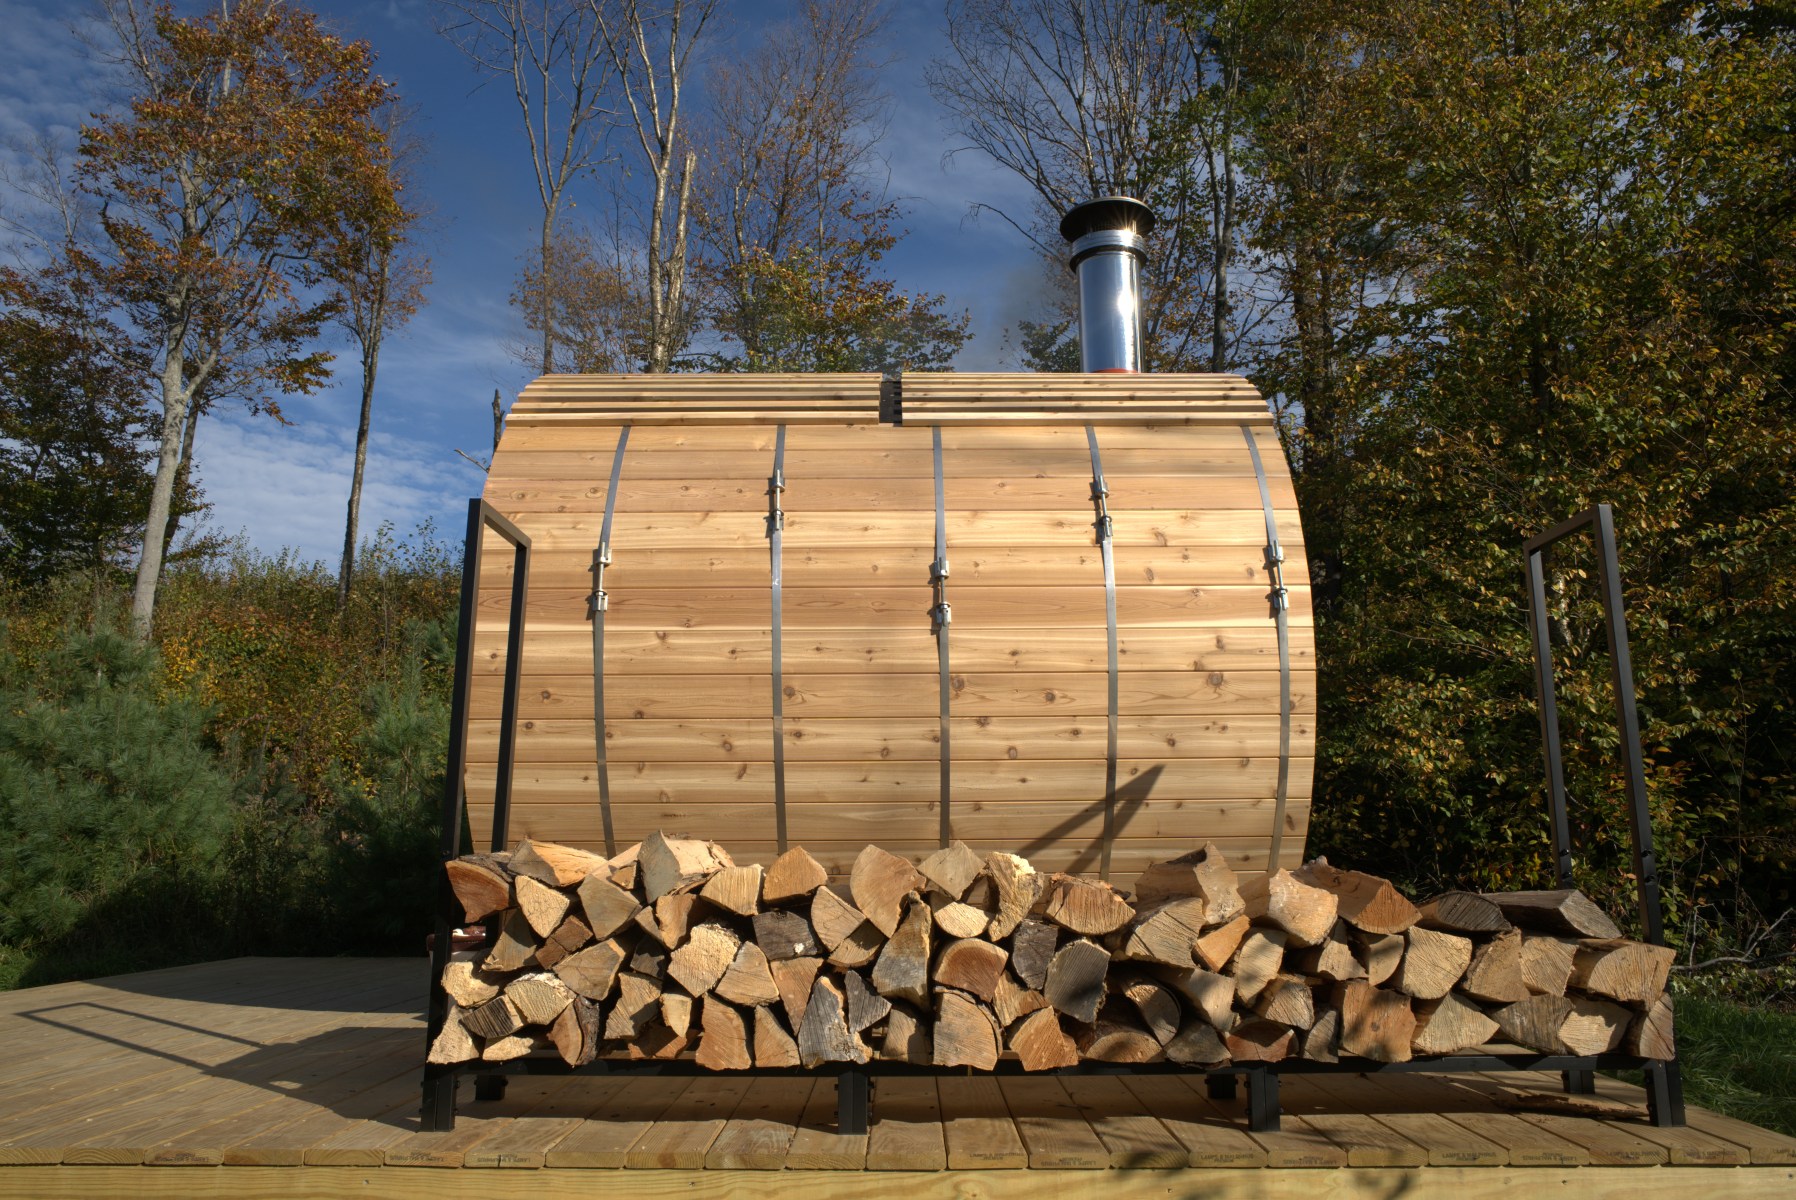 <strong>Choosing Sauna Size and Type</strong><br>"First, you have to decide if you're going indoor or outdoor," Bollman says. "Then, you have to think about how many people you would imagine having in it at a given time and, secondarily, if you want to be able to sit in it or do you want to be able to lie down in it. You also need to decide if your heat source will be electric or wood-burning. The latter takes up significantly more space, but you get the crackle of the wood and you also get the natural light of the fire passing through ... I put it on a piece of the property that's fully off grid — but there's so much wood."